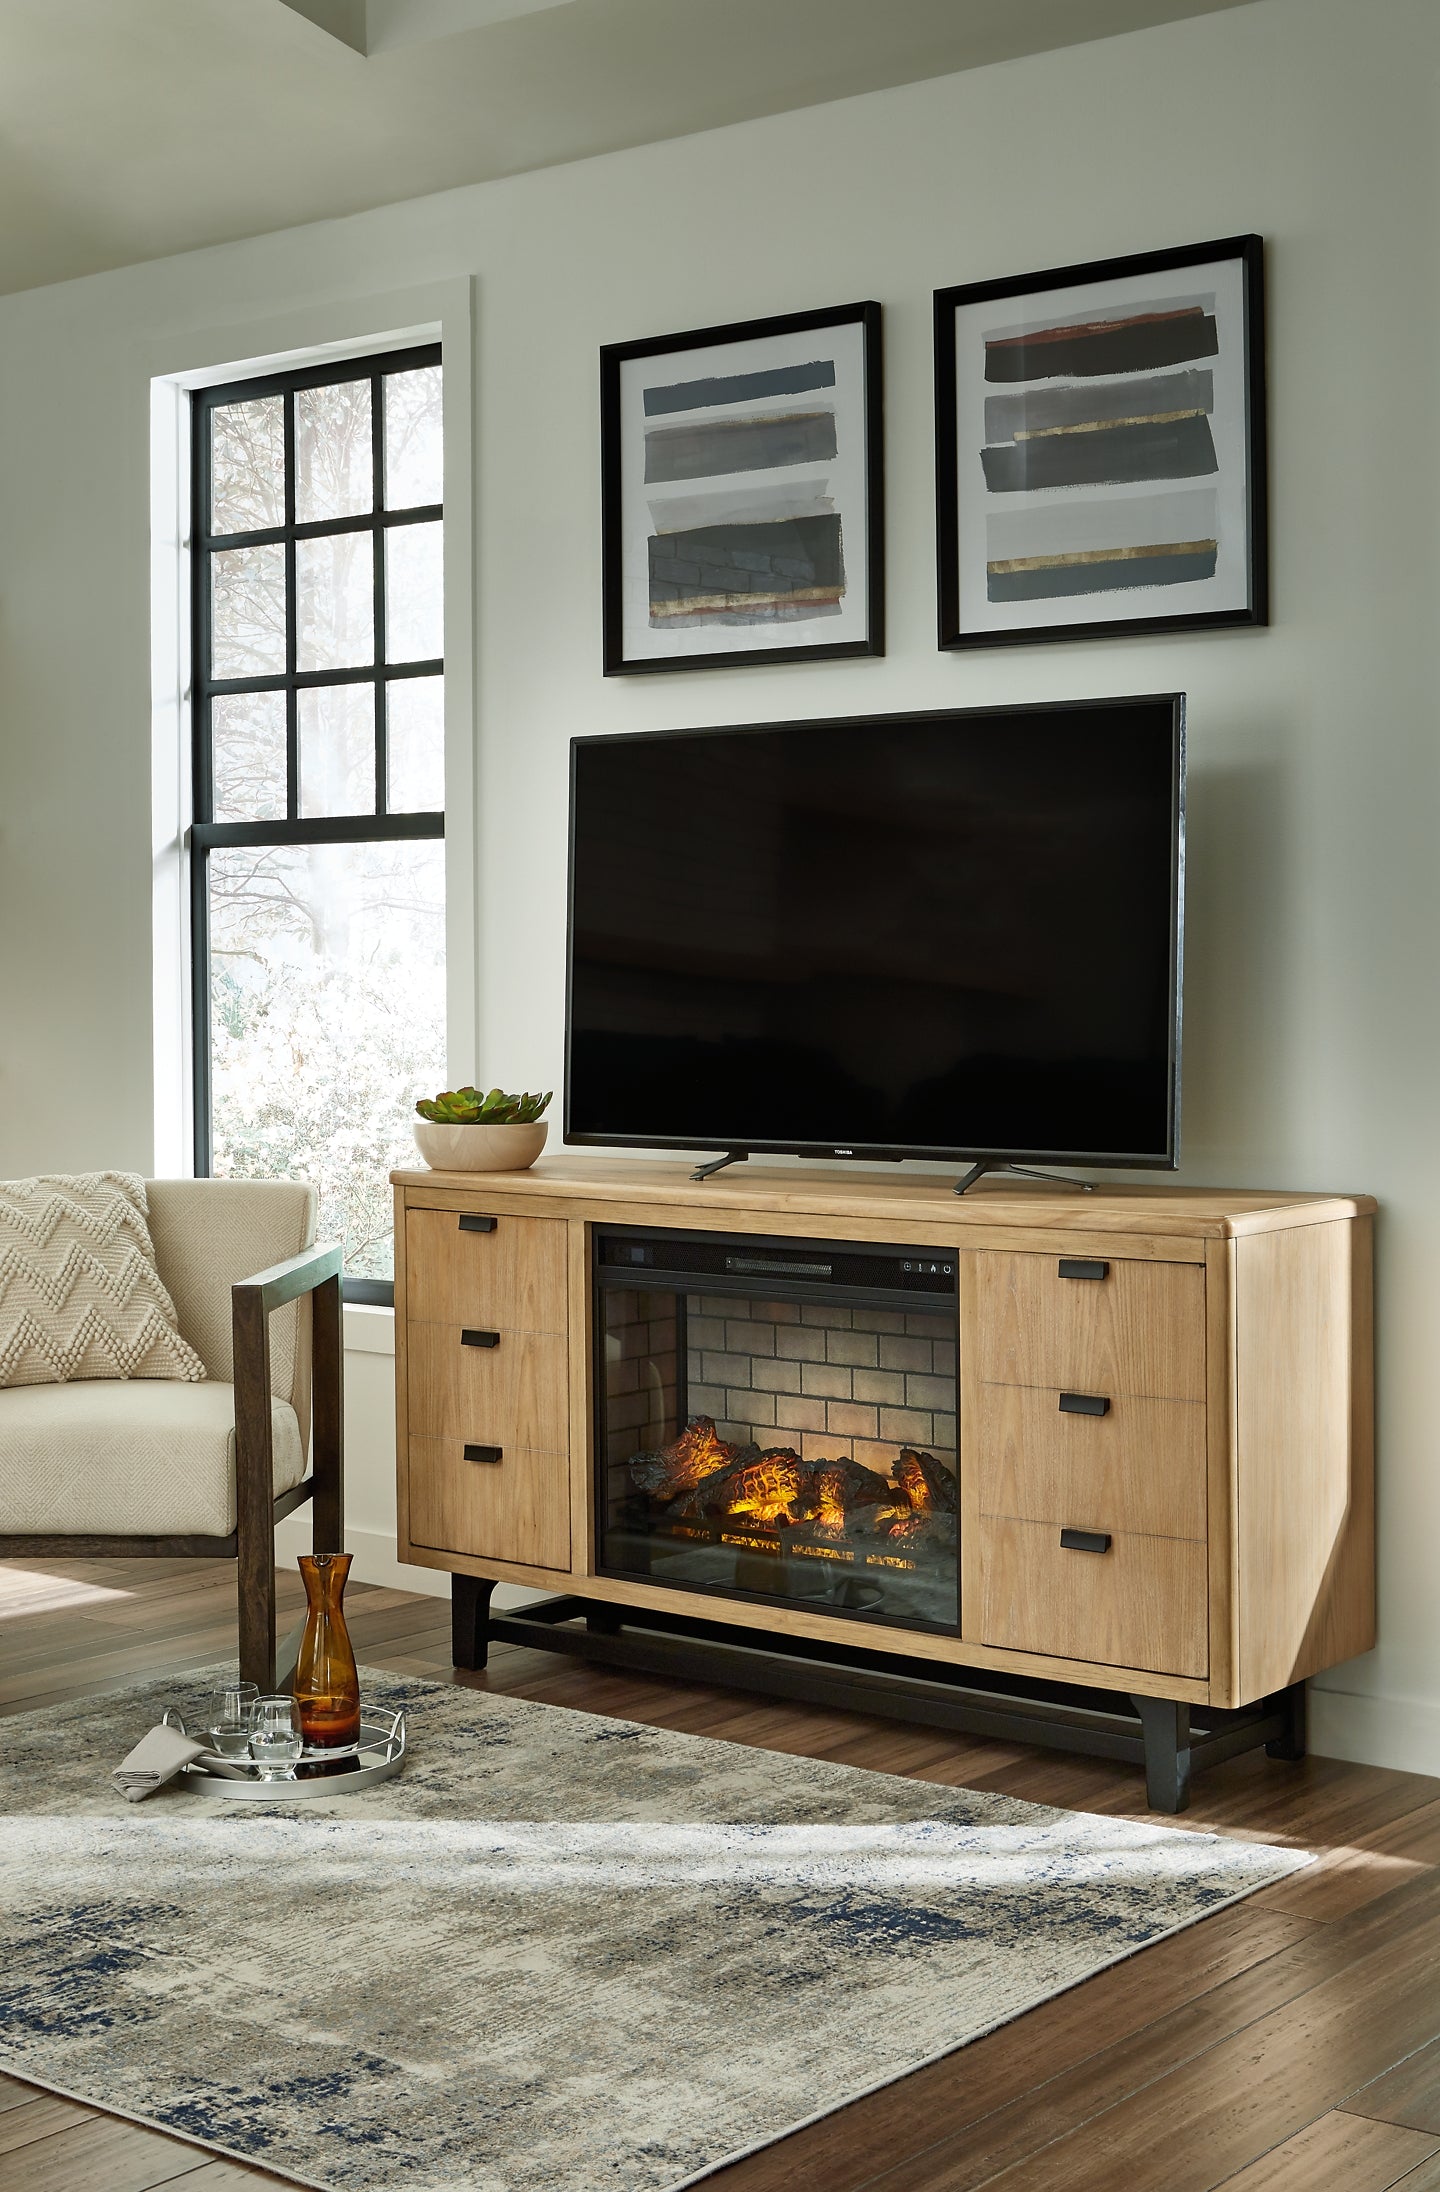 Ashley Express - Freslowe TV Stand with Electric Fireplace Wilson Furniture (OH)  in Bridgeport, Ohio. Serving Bridgeport, Yorkville, Bellaire, & Avondale